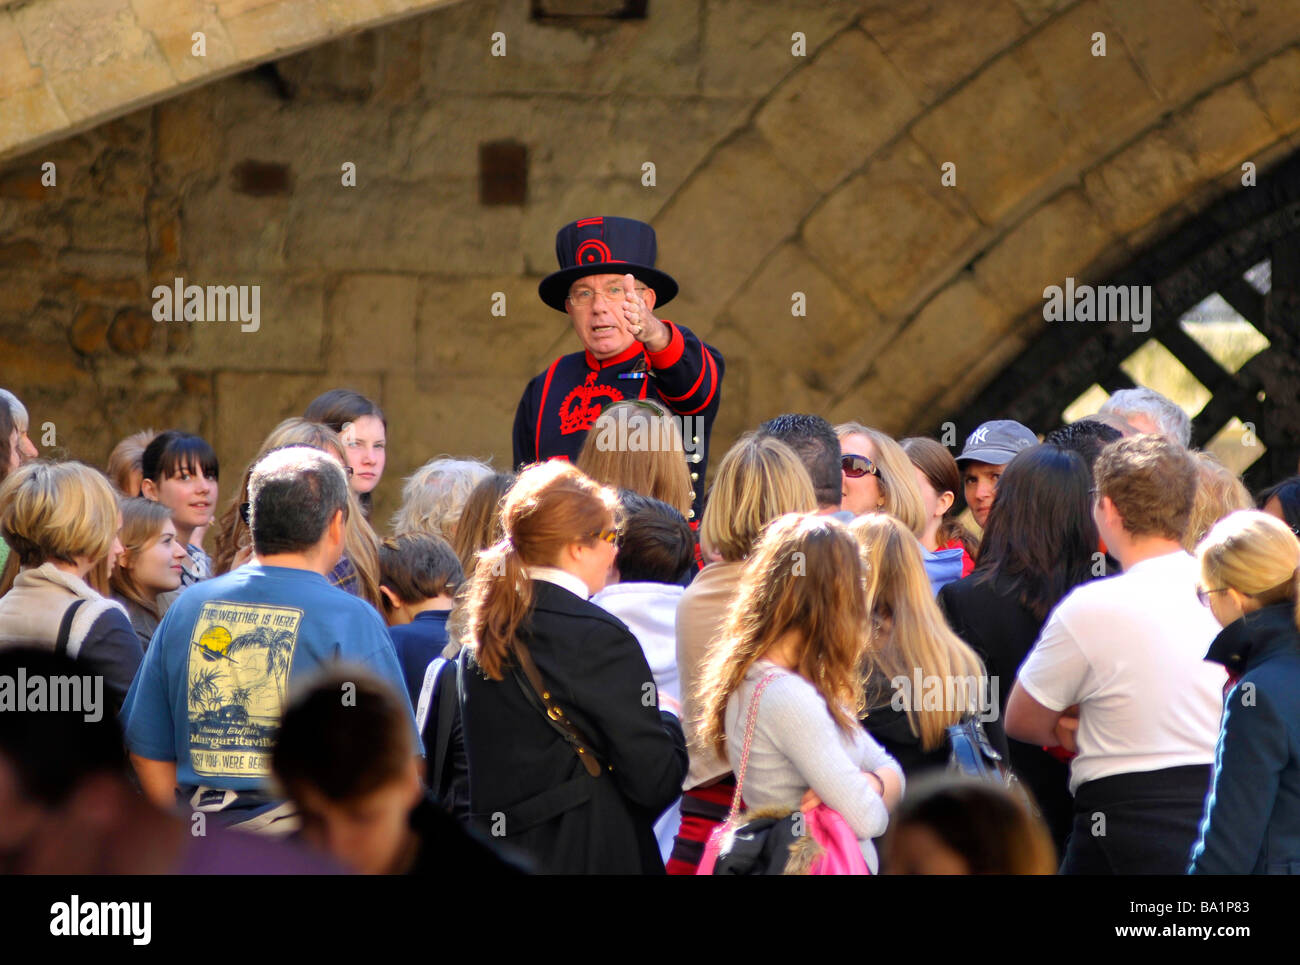 Beefeater oder Yeoman, Tower of London, England, UK Stockfoto